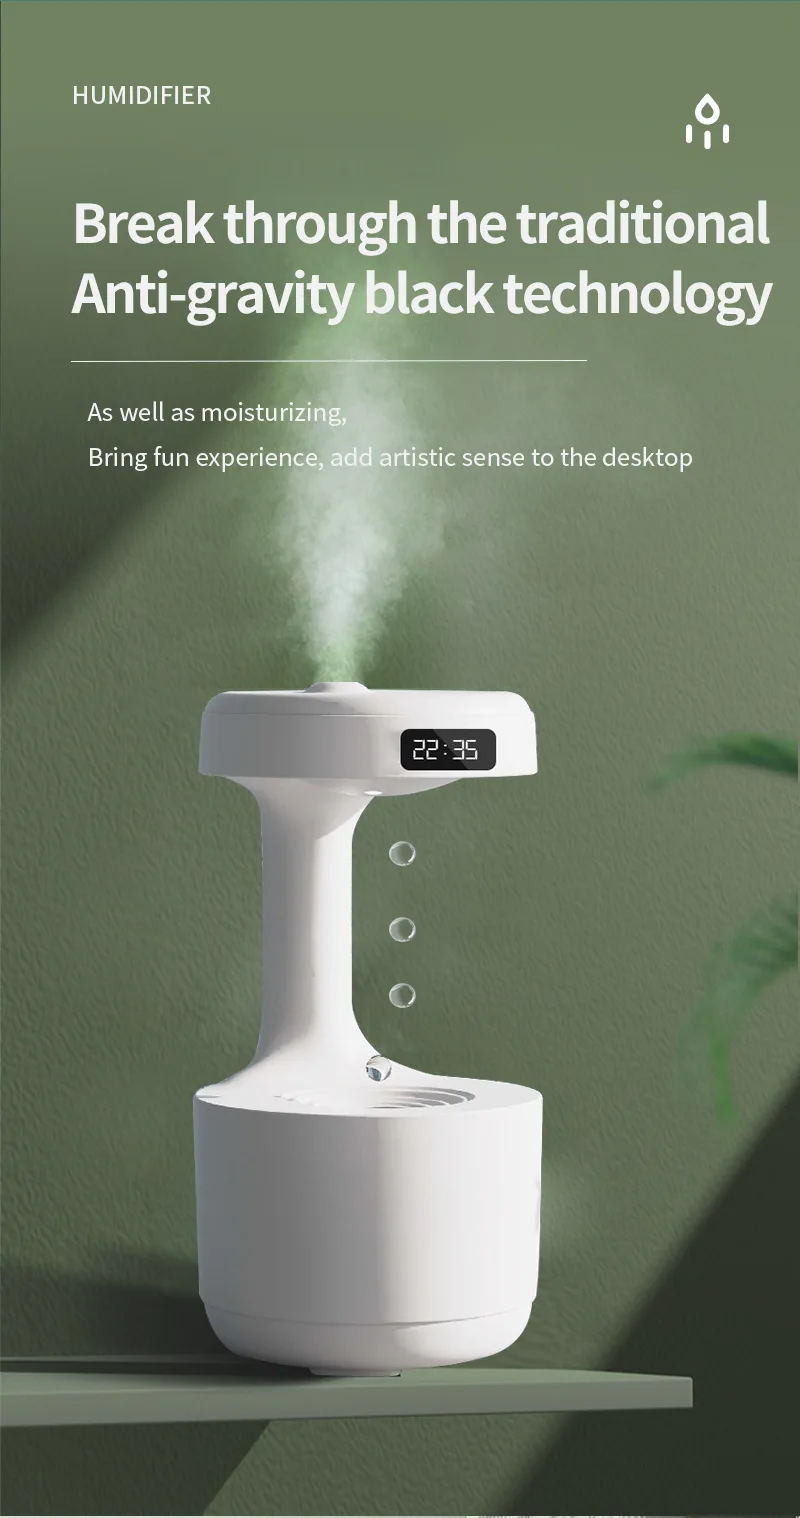 Hypnotic Anti-gravity Aroma Diffuser and Humidifier suspended in mid-air, dispersing soothing aromas